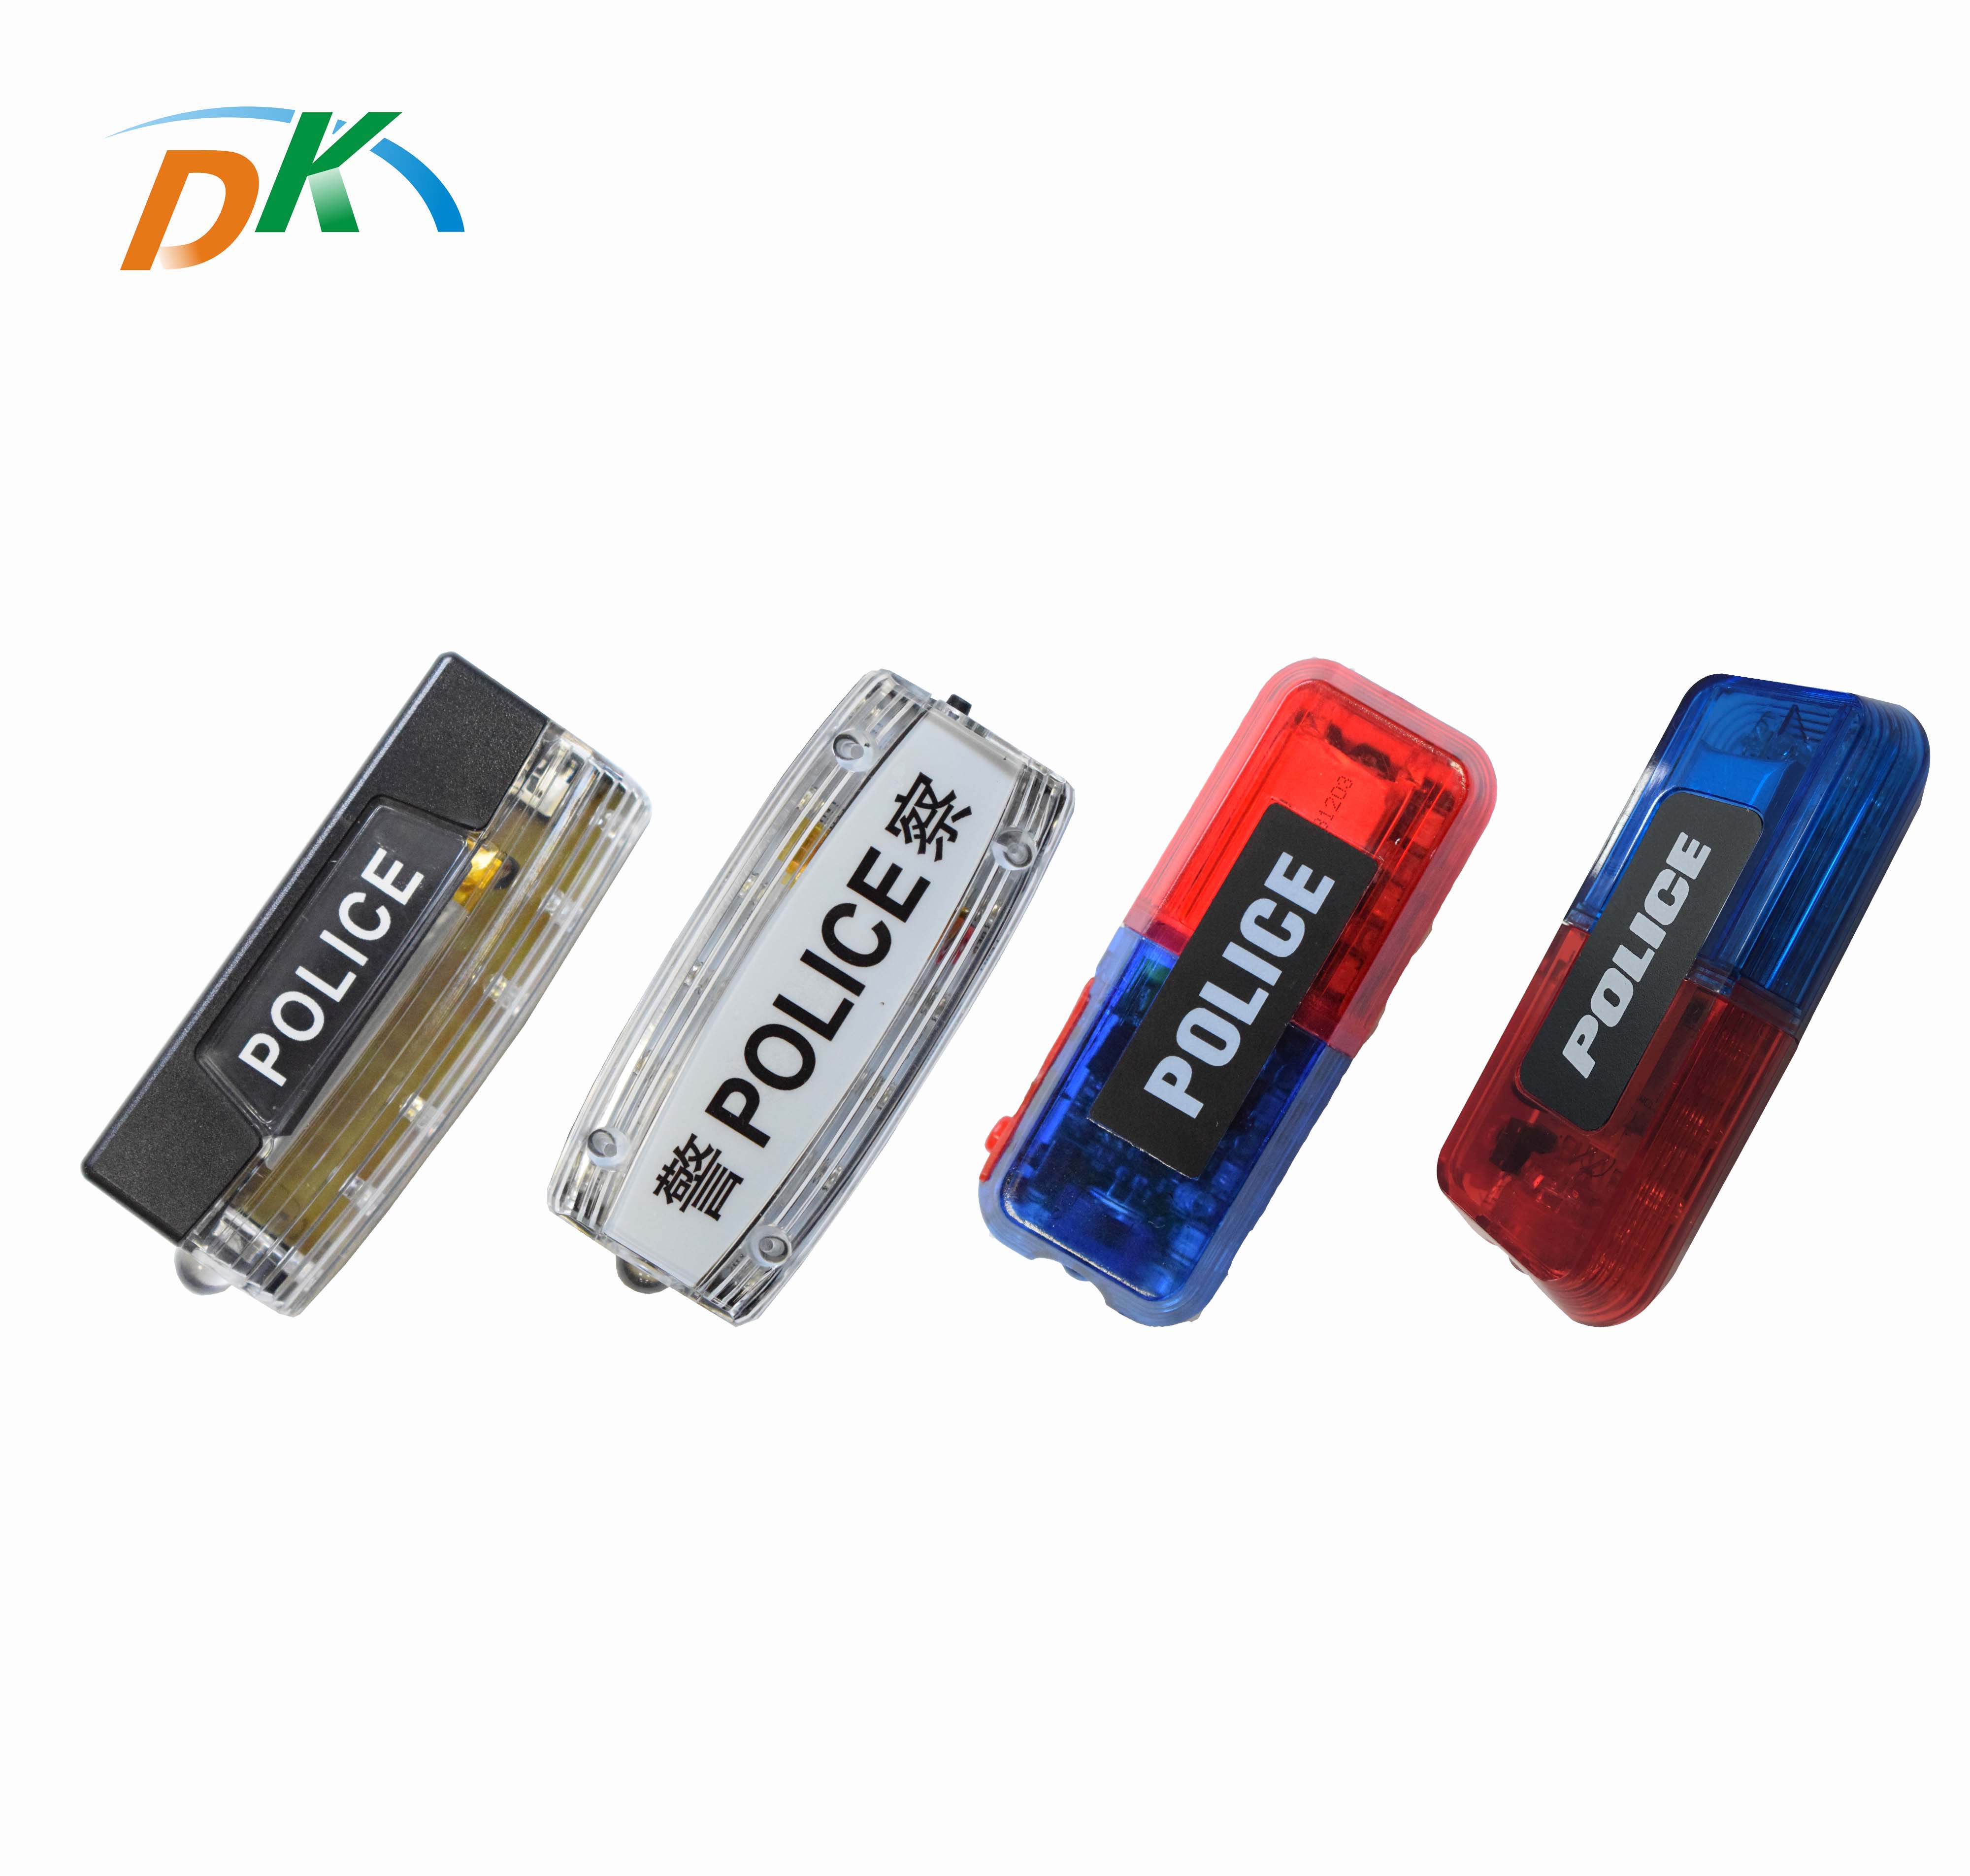 DK LED Outdoor Rechargeable Red and Blue Flashing Police Shoulder Warning Light